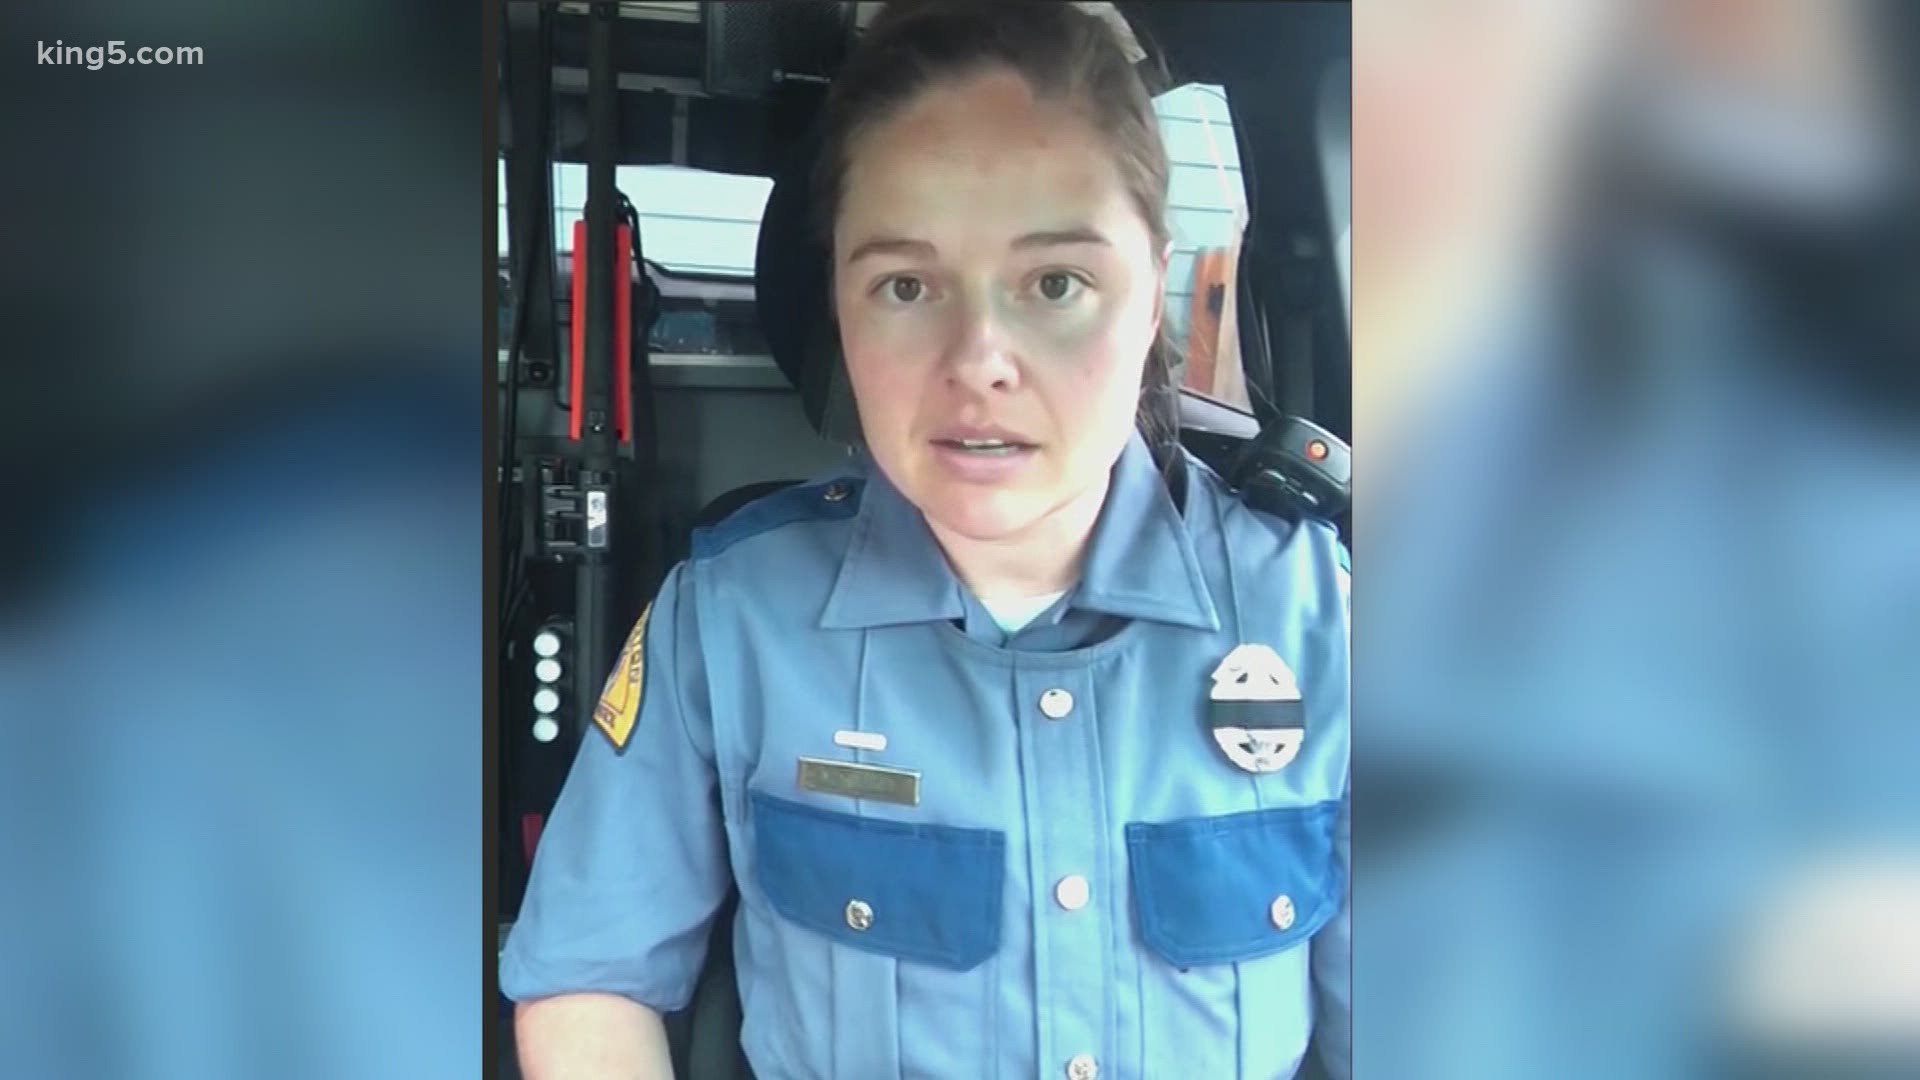 A driver says WSP Trooper Jessica Schob protected him and other vehicles when she intercepted a wrong-way driver on Highway 3 near Silverdale on Friday.